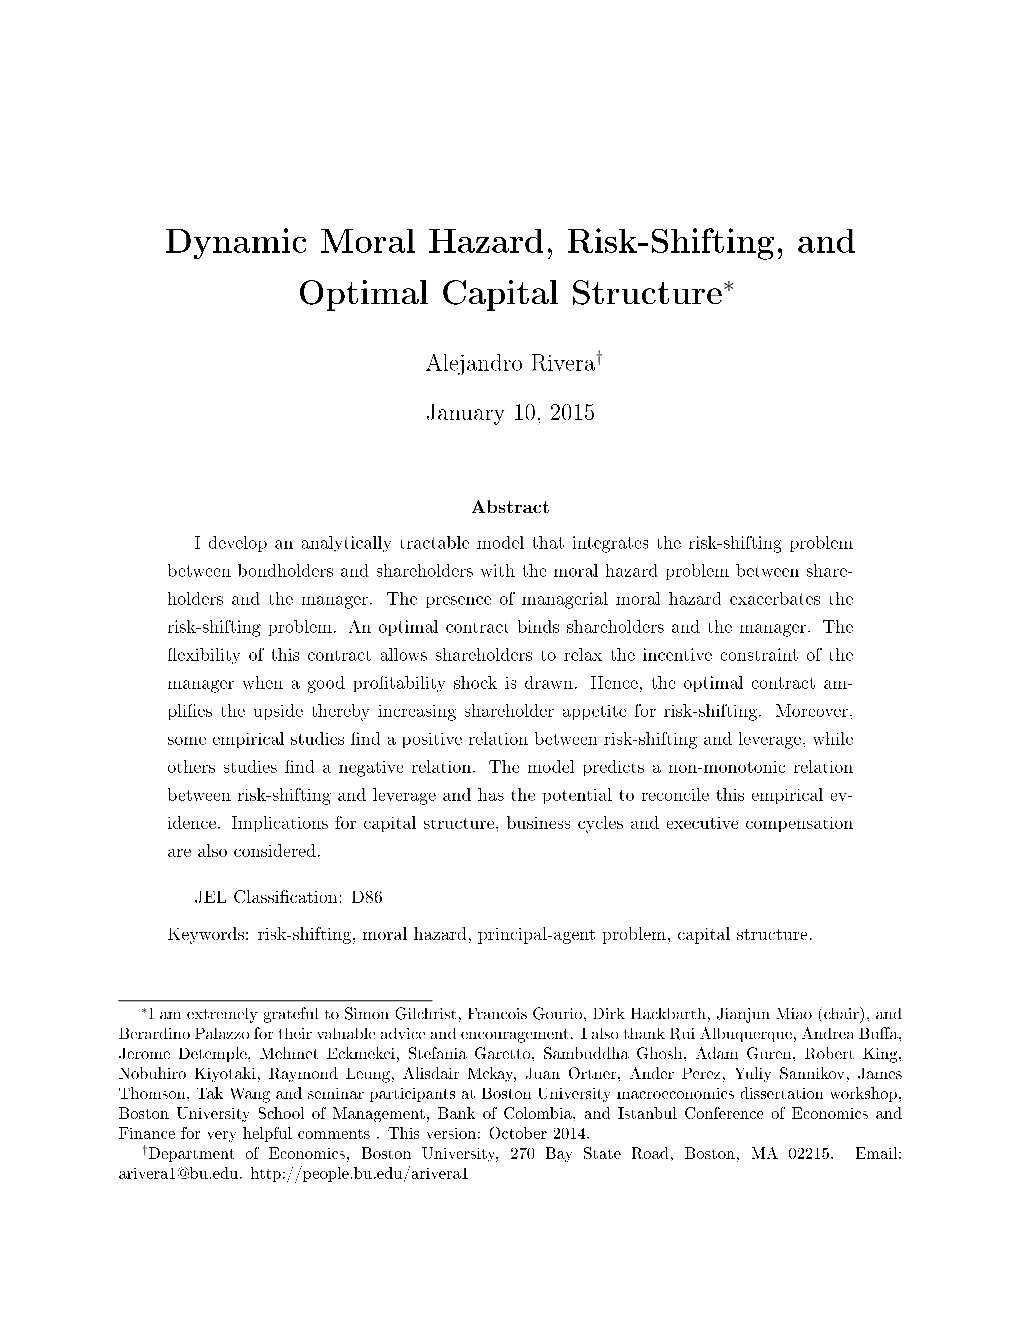 Dynamic Moral Hazard, Risk-Shifting, and Optimal Capital Structure∗